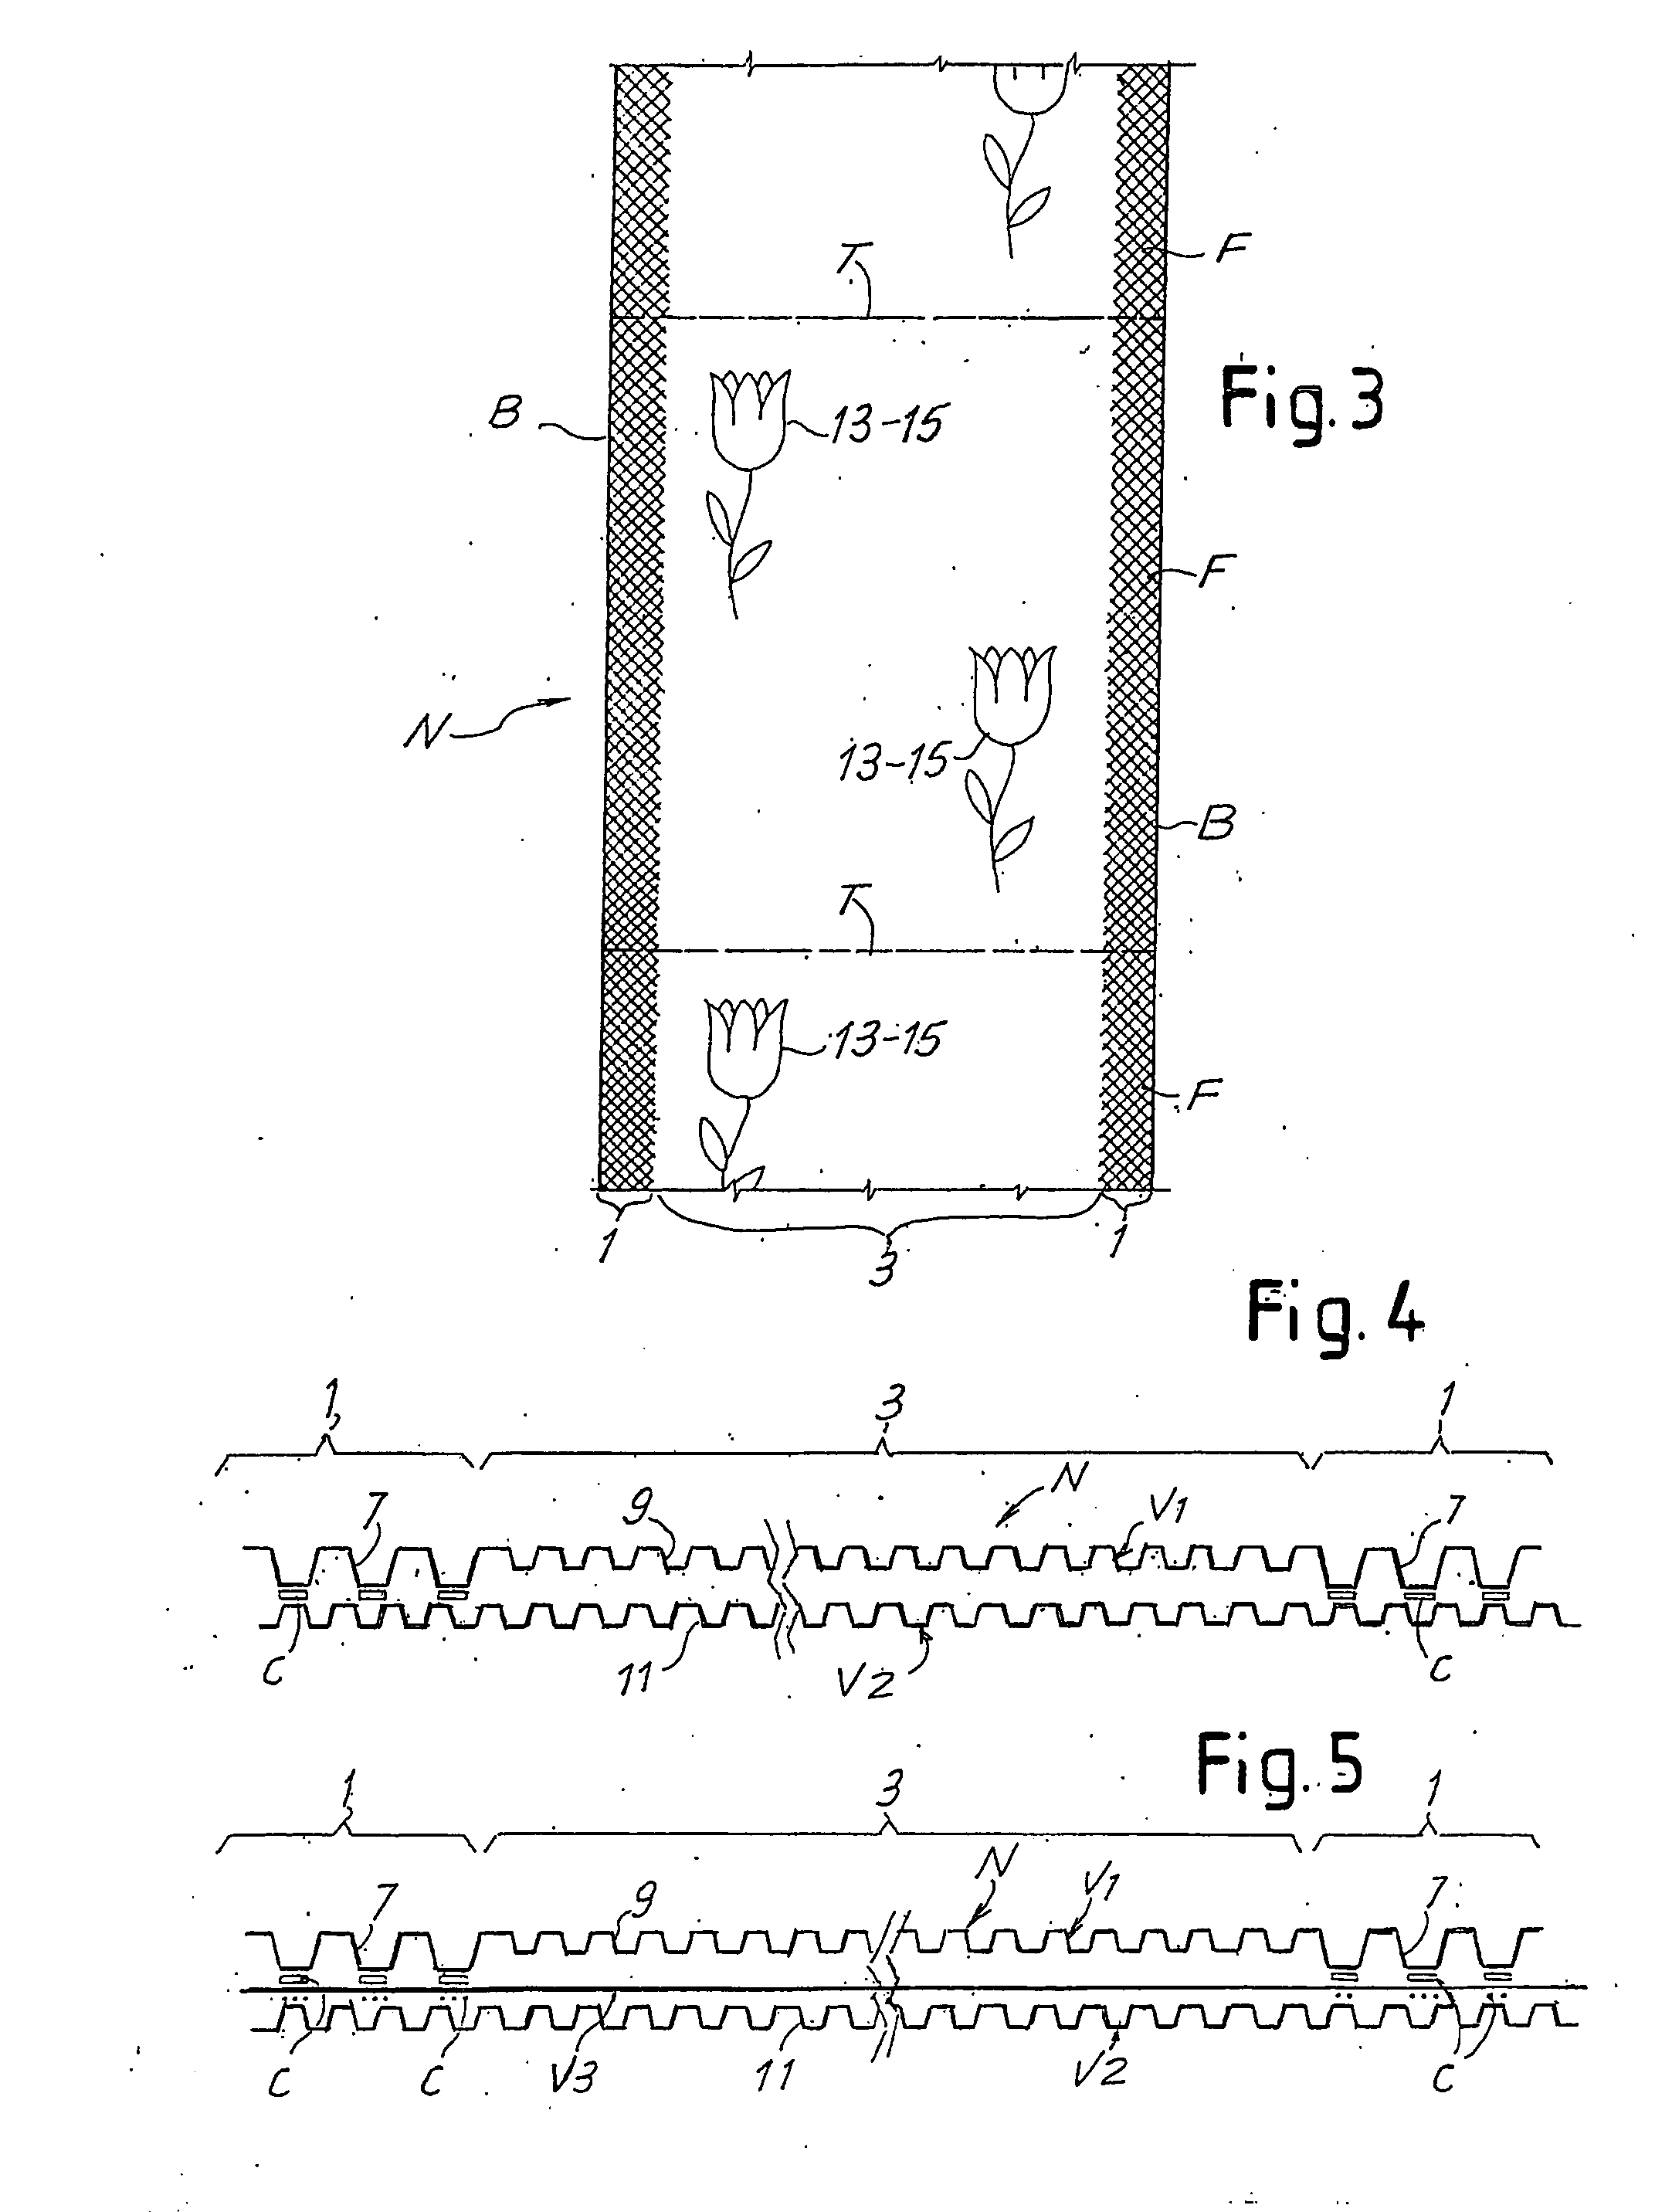 Sheet Product Comprising at Least Two Plies Joined by Gluing with Non-Uniform Distribution of the Glue